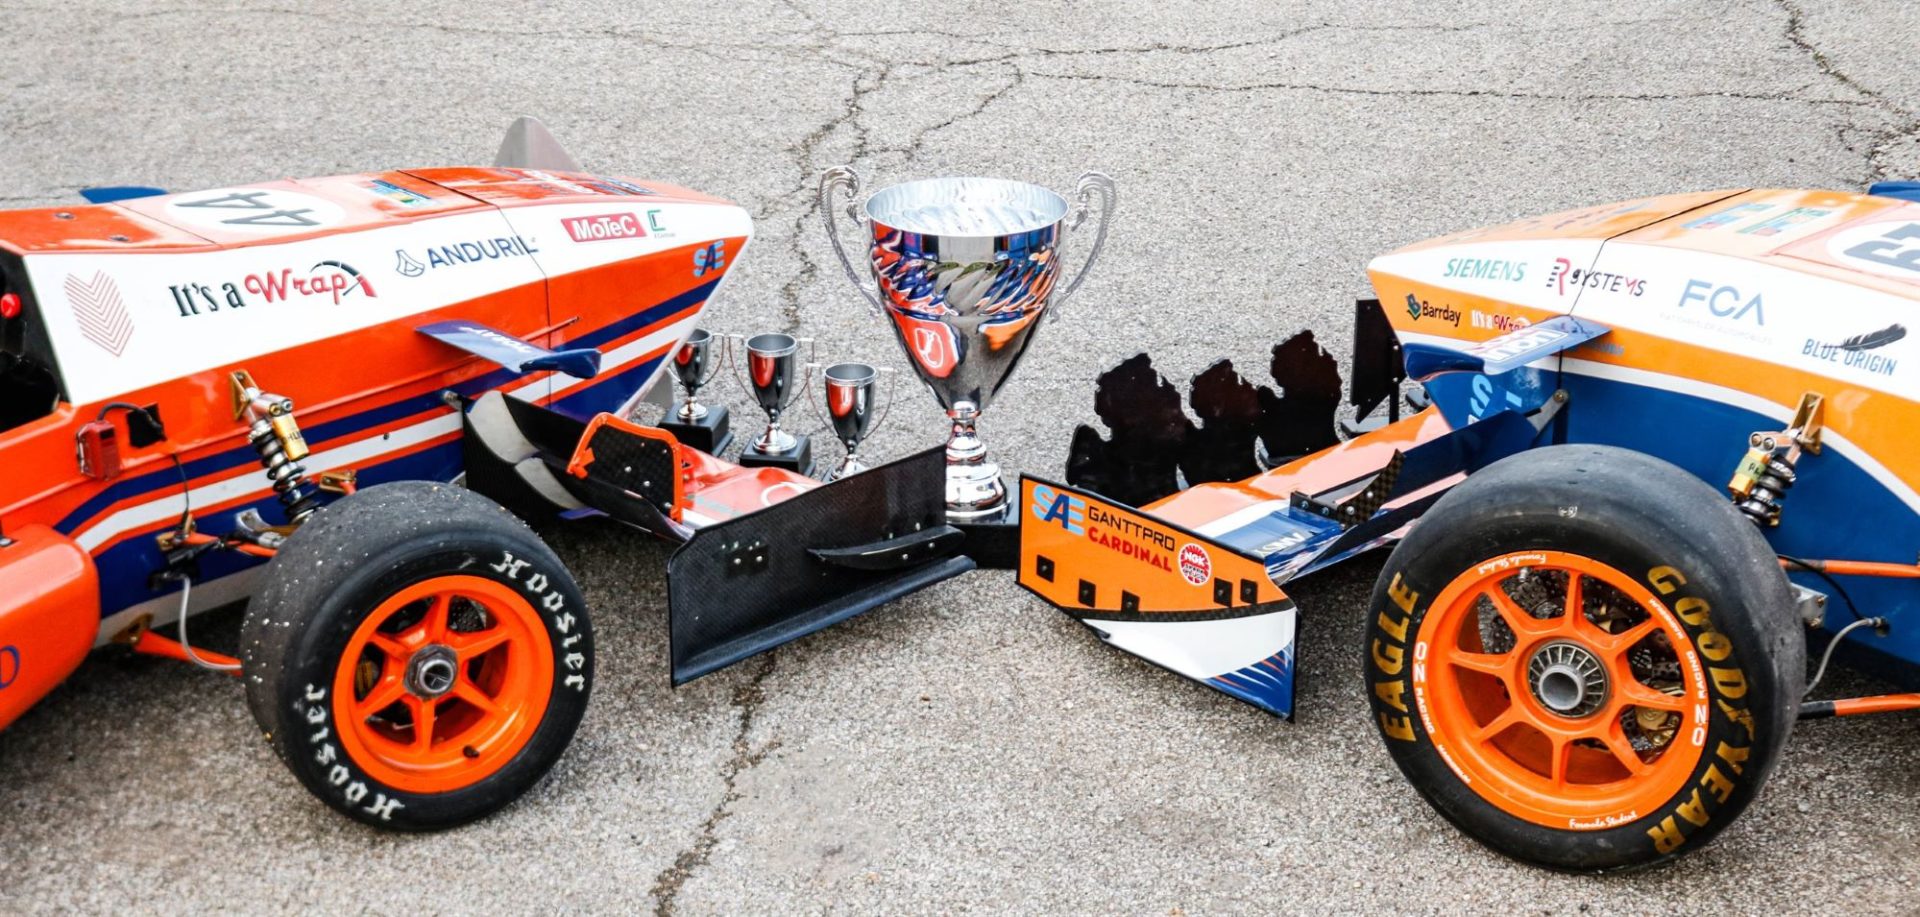 Two motorsports vehicles are nose to nose on a slab of pavement, with a trophy placed between them.